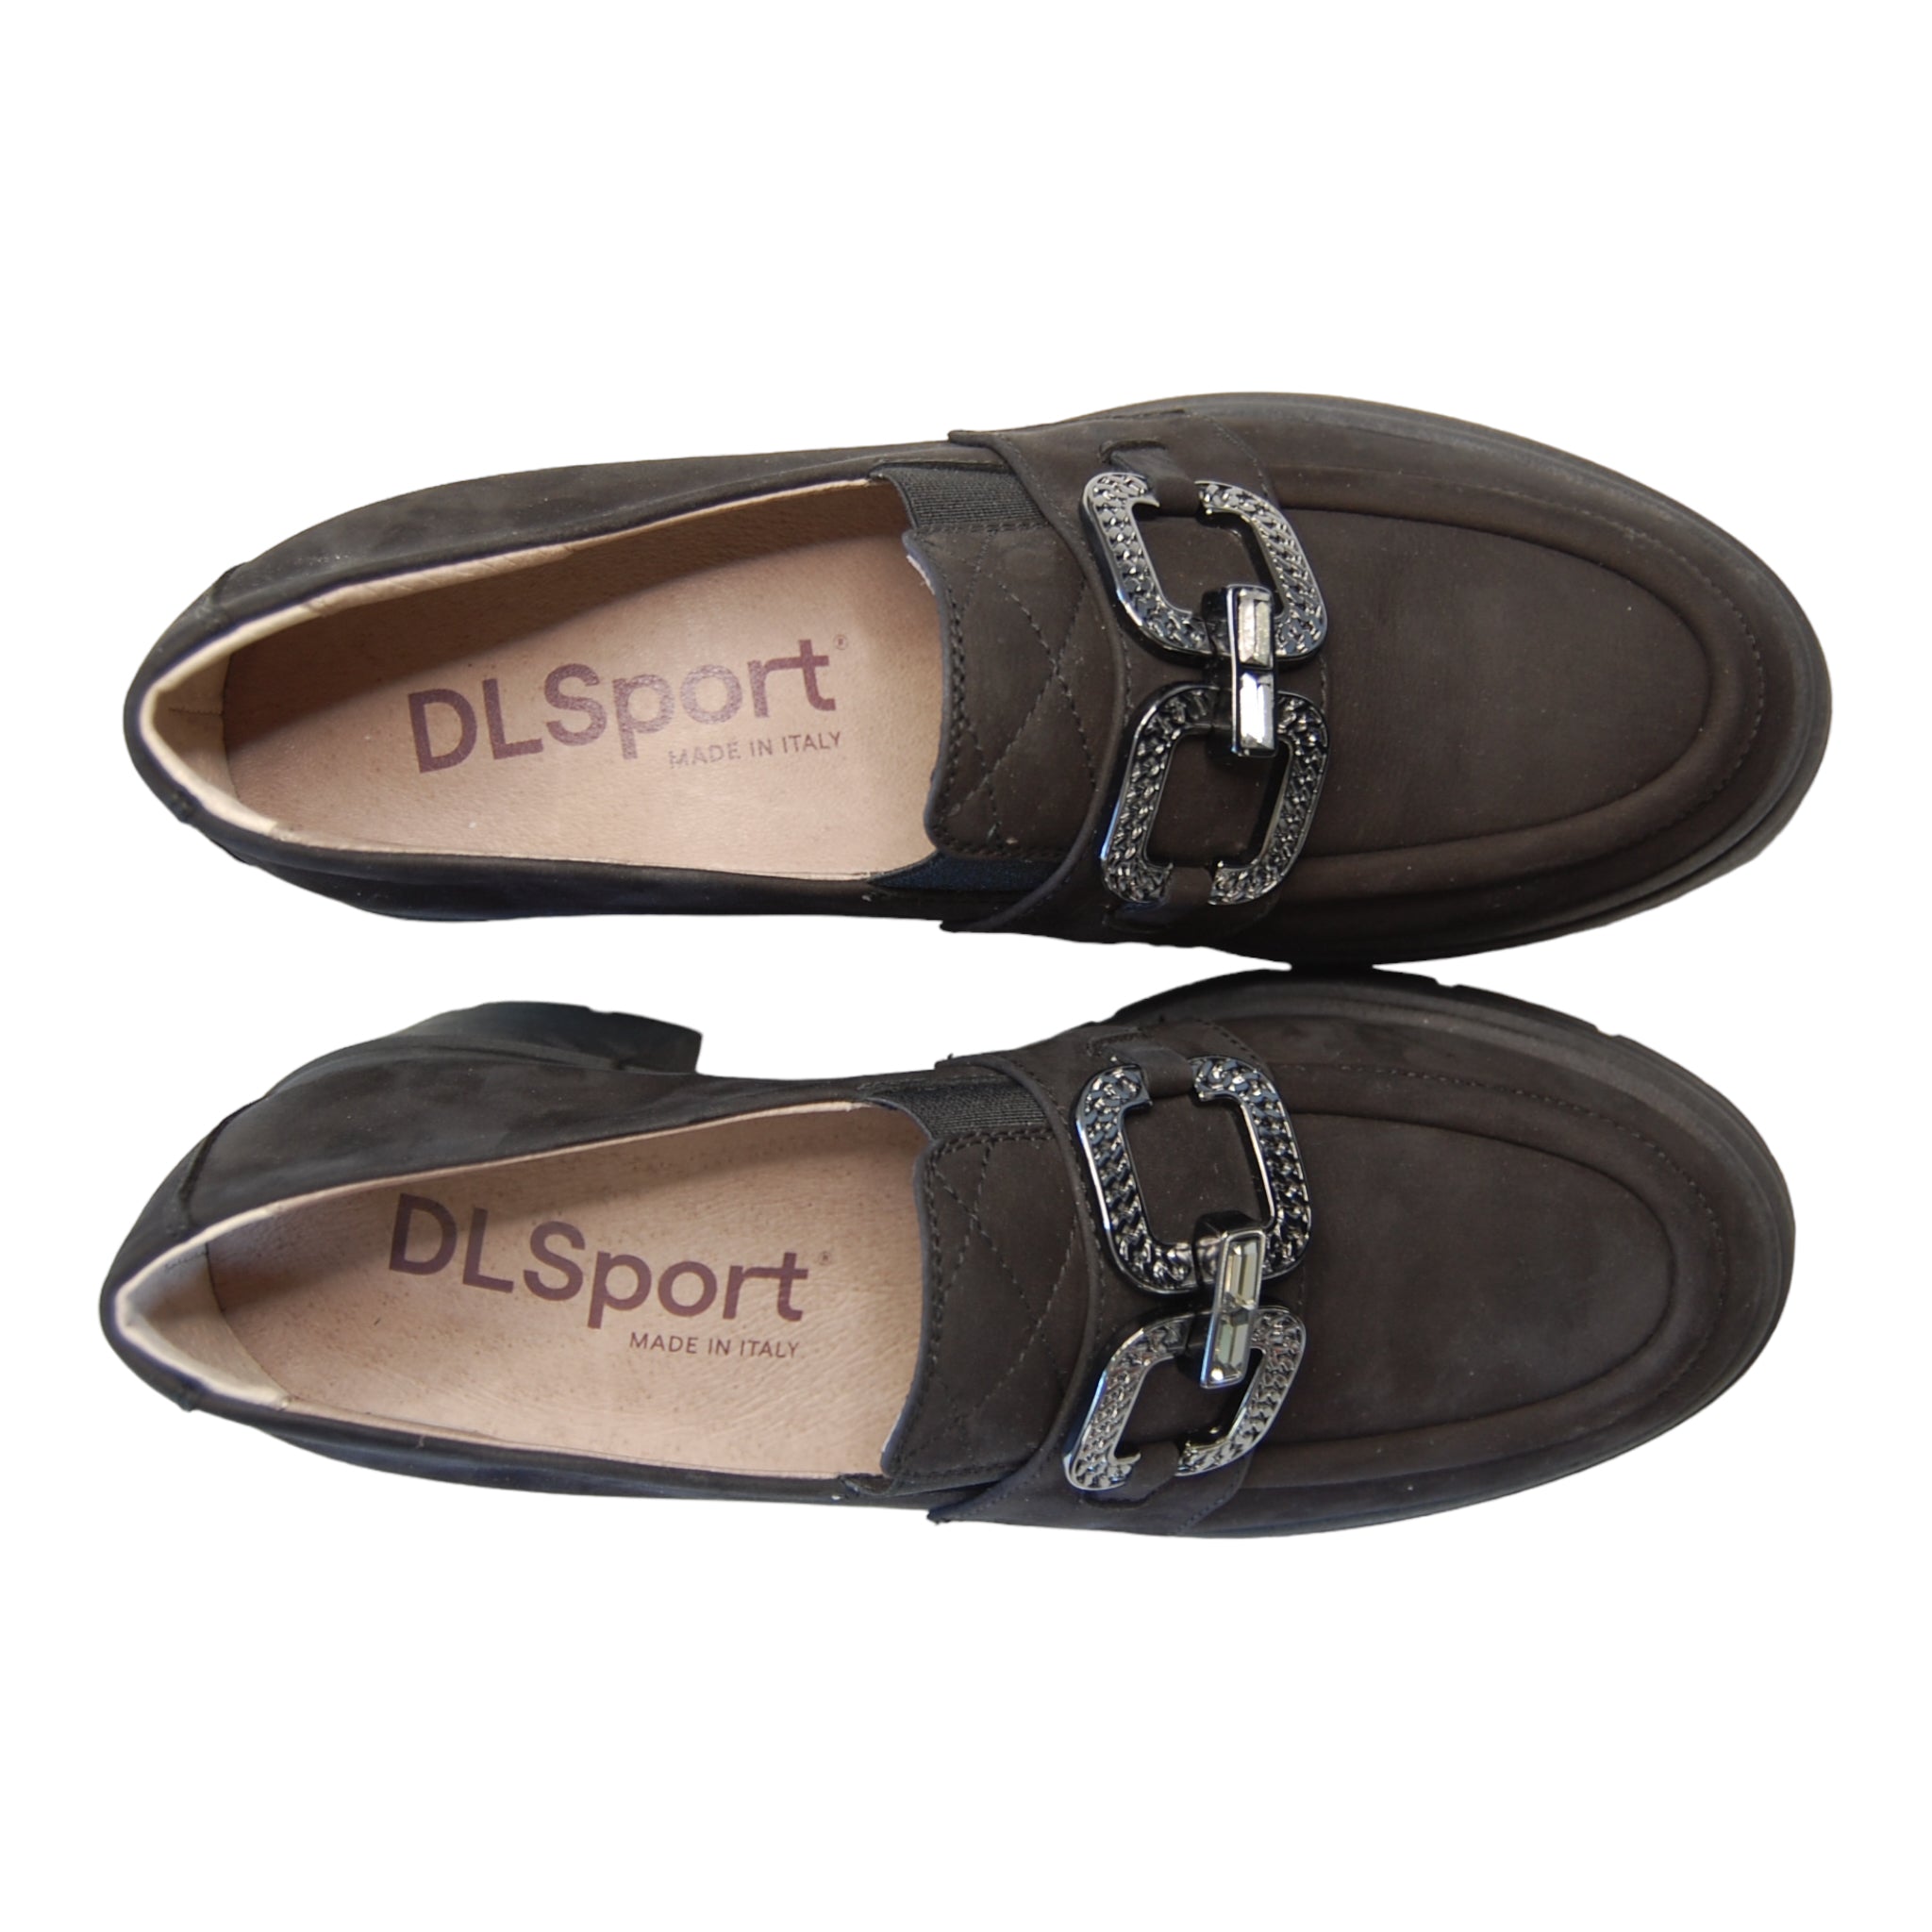 DL Sport Chain Loafer Black Nubuck Leather top down view